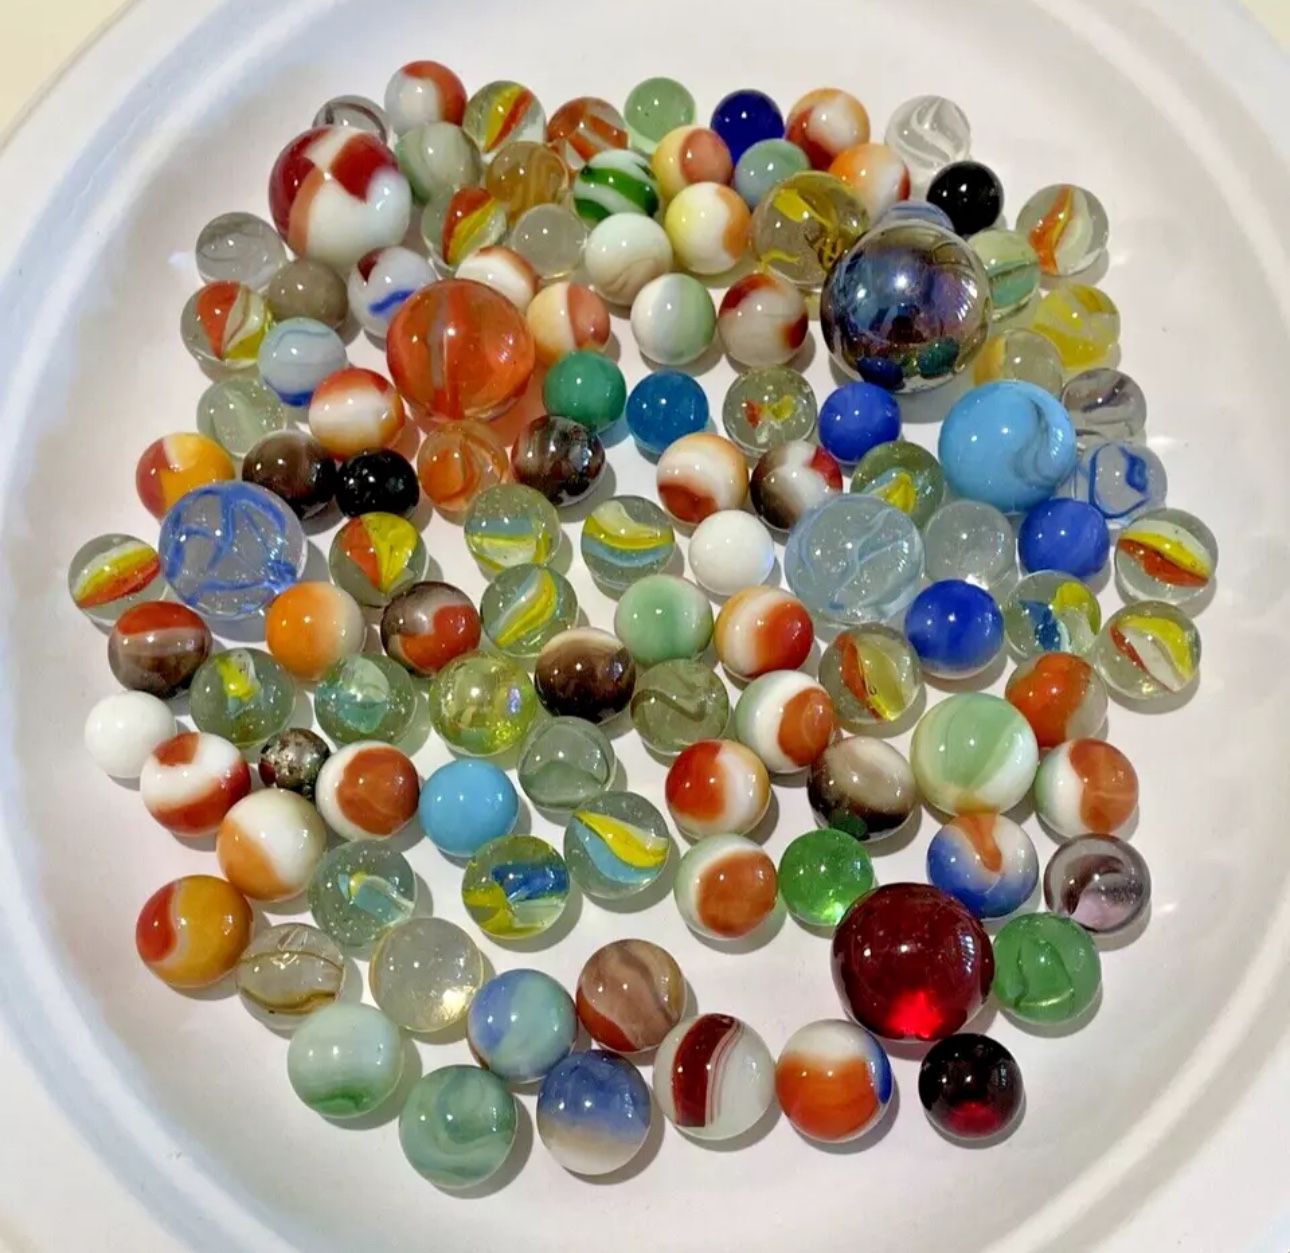 Vintage Mixed Lot Glass Toy Marbles More Than 100 Units 1.44 lb